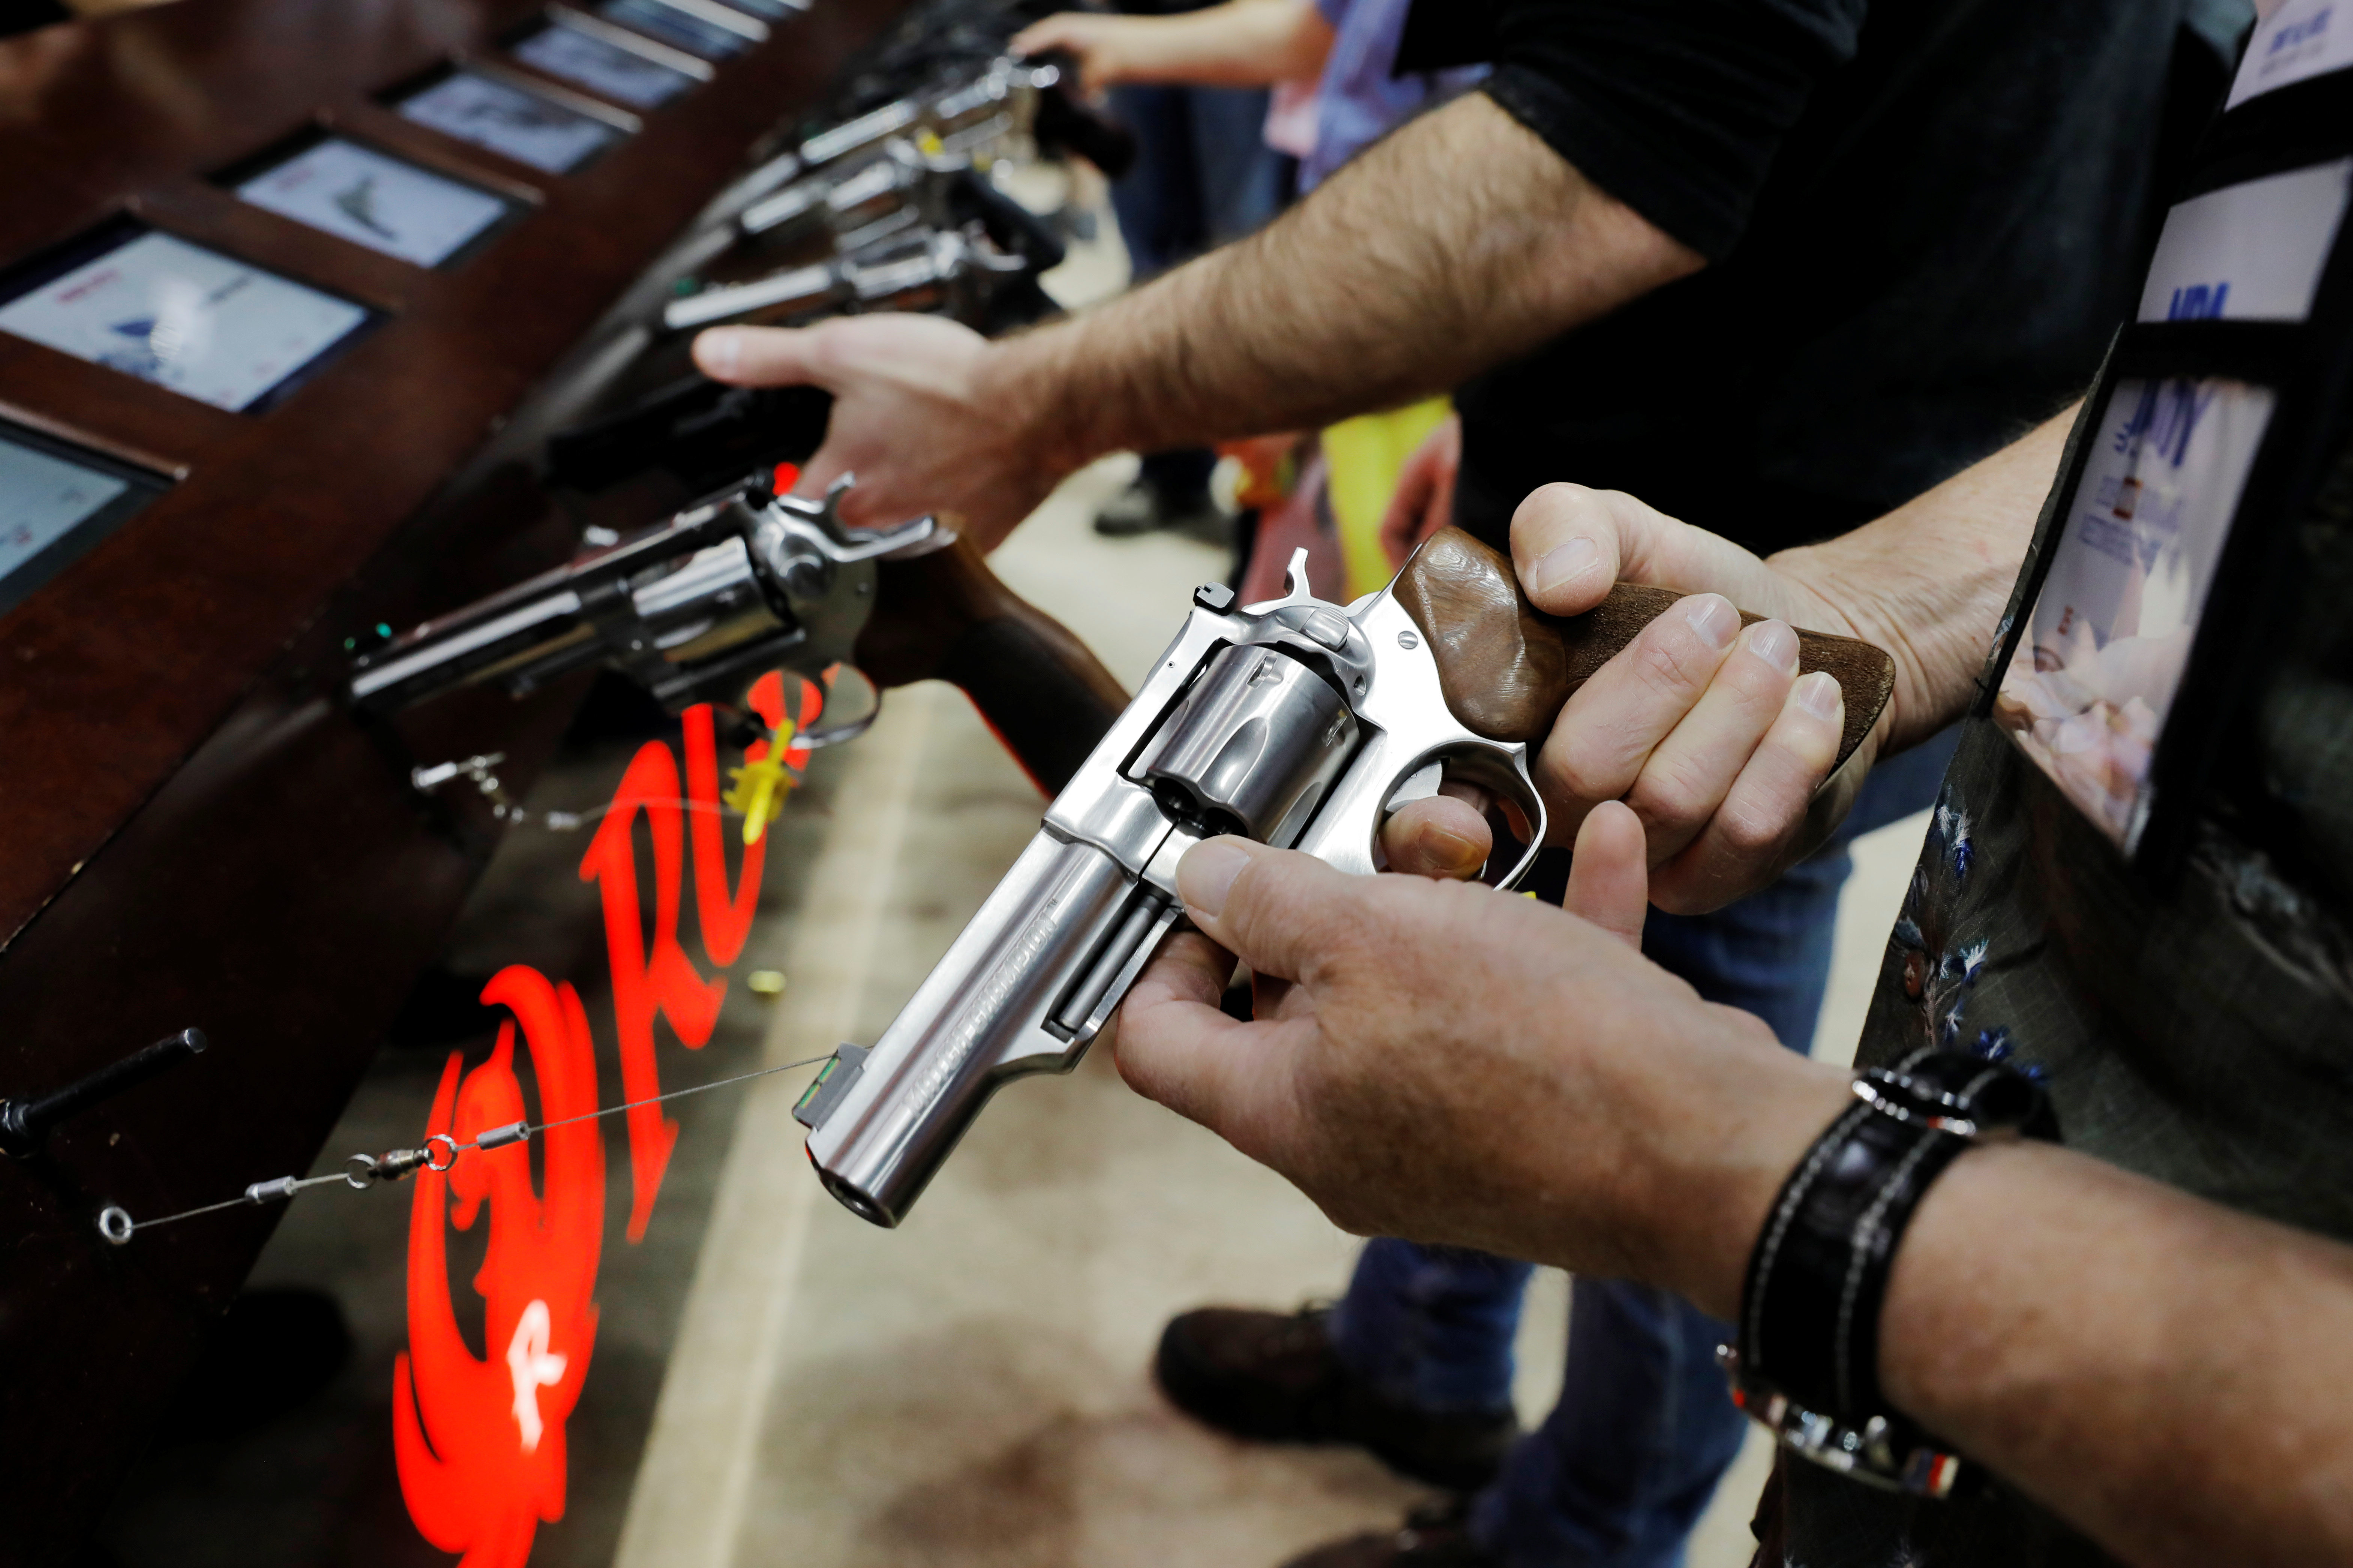 A man handles a Ruger revolver during the National Rifle Association (NRA) annual meeting in Indianapolis, Indiana